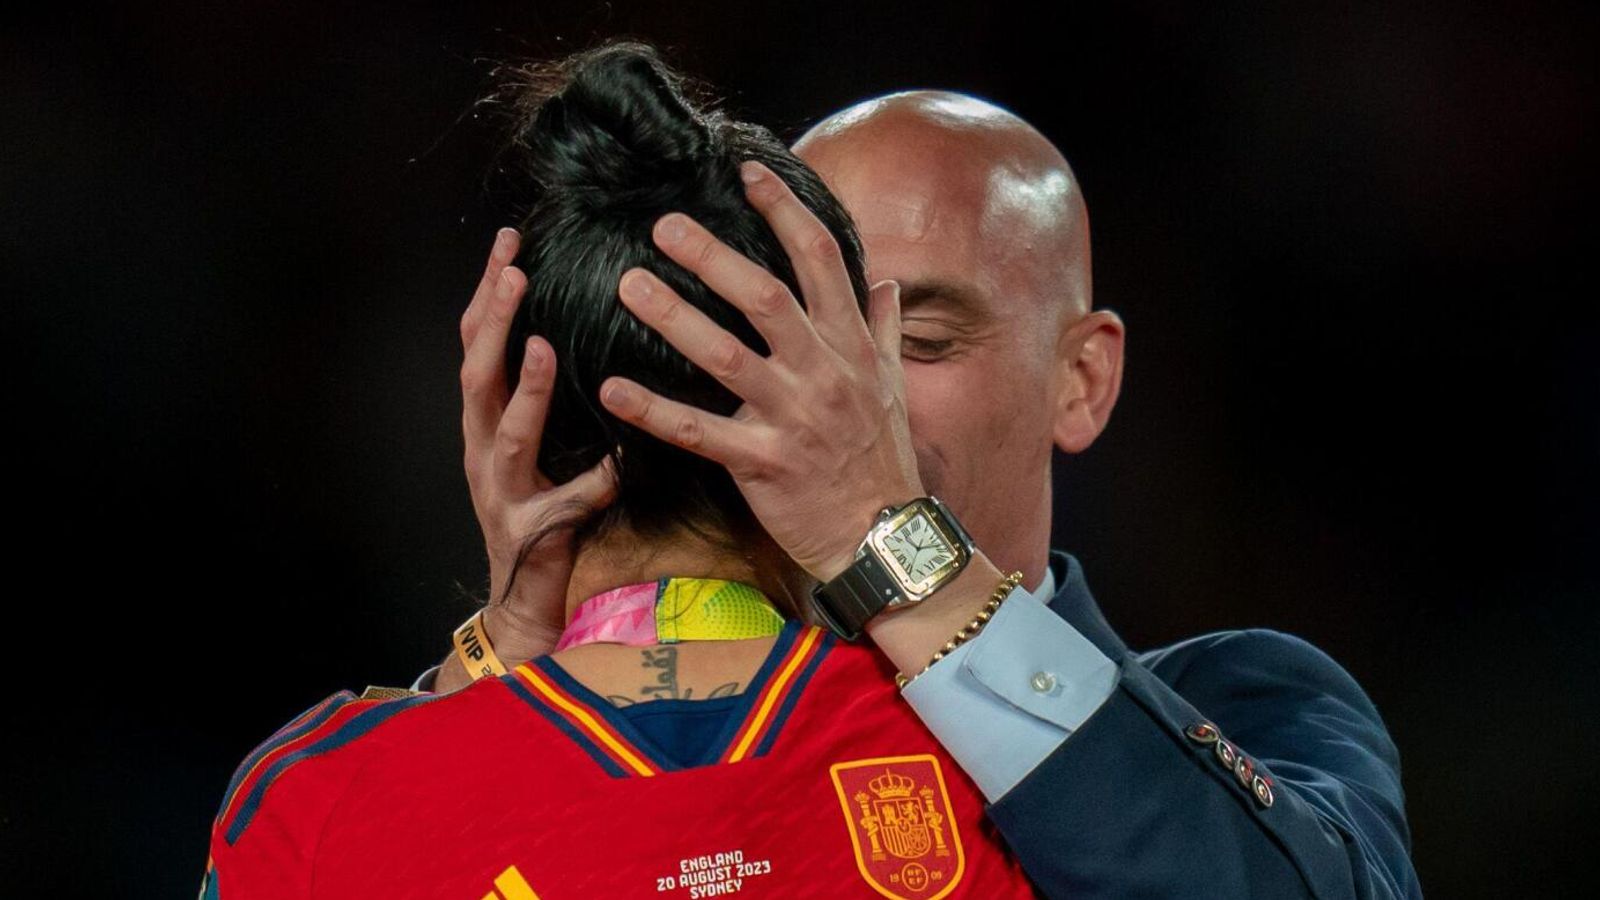 Luis Rubiales given restraining order banning him from going near Jenni Hermoso after World Cup kiss